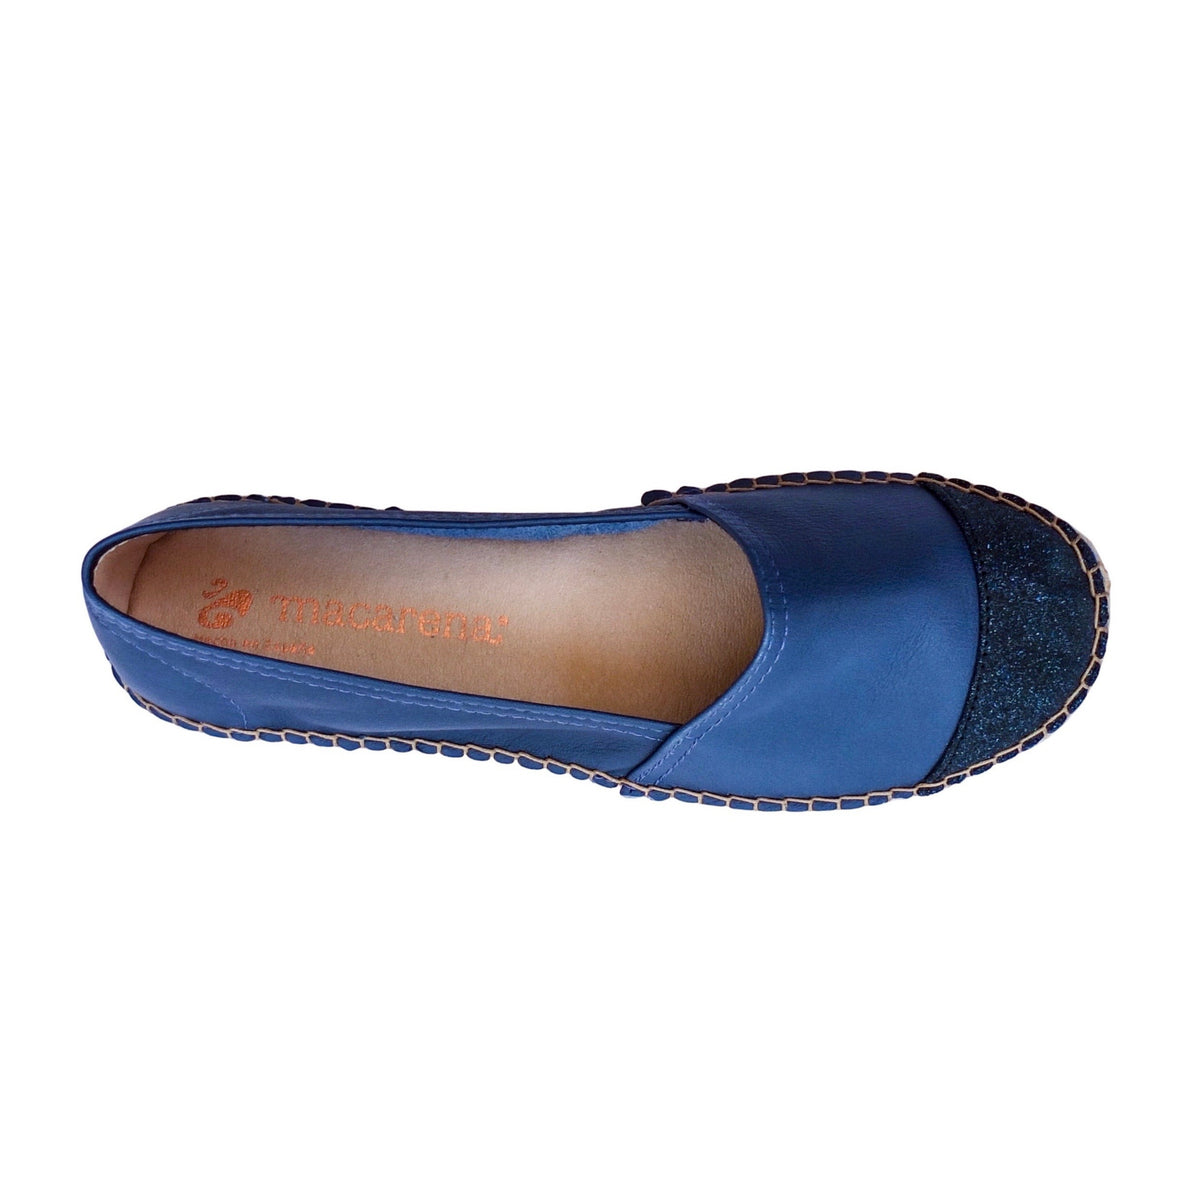 Traditional Espadrilles with a Dazzling Royal Blue Glitter Twist | Flat Shoes |  Shoeq